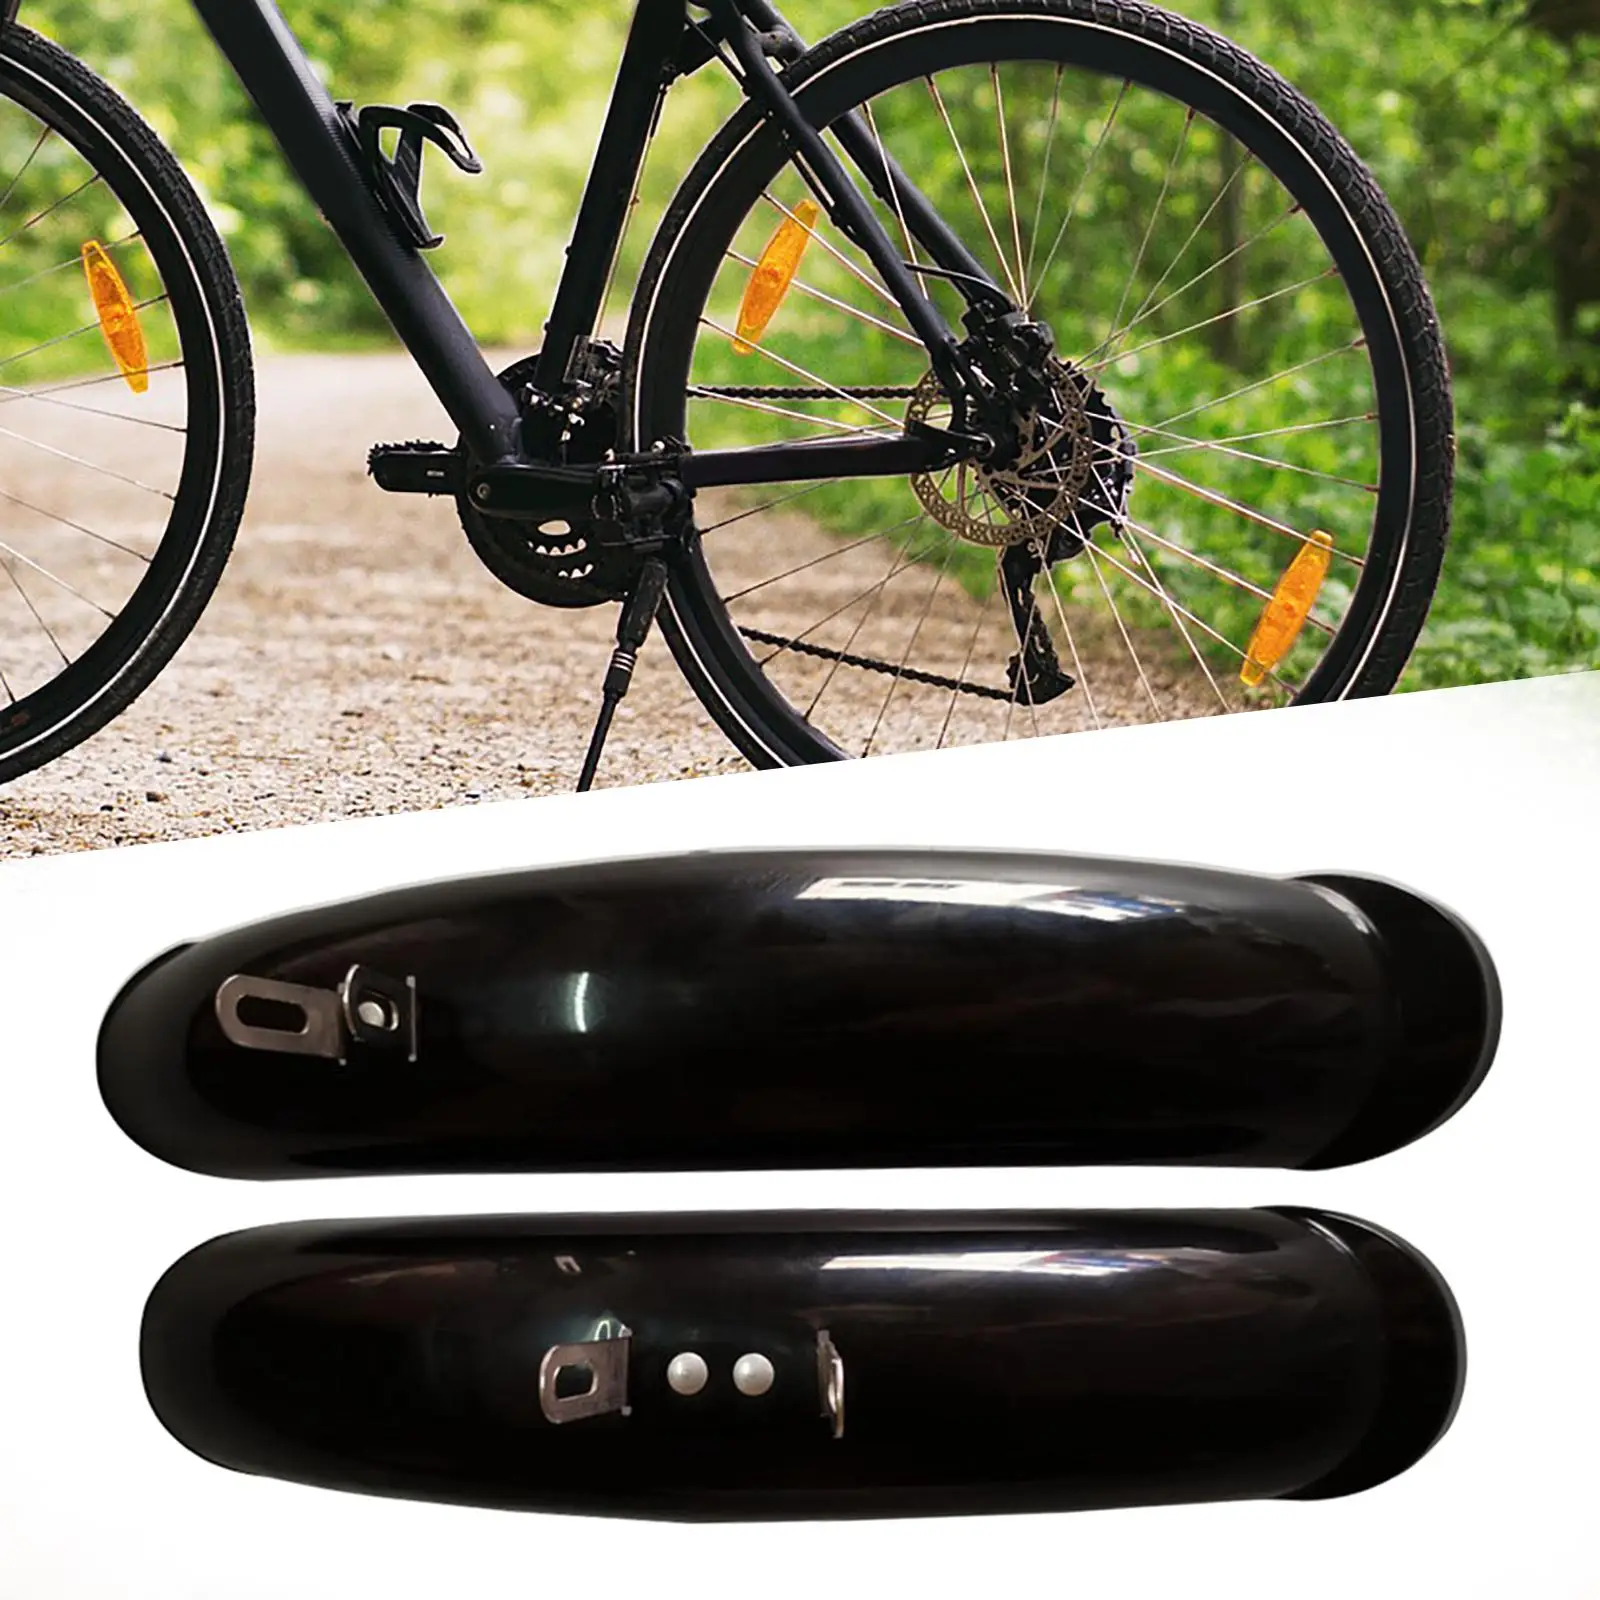 Kids Bicycle Mudguard Set Components Lightweight Simple Installation Bike Front & Rear Fenders for Cycling Sports Riding Outdoor